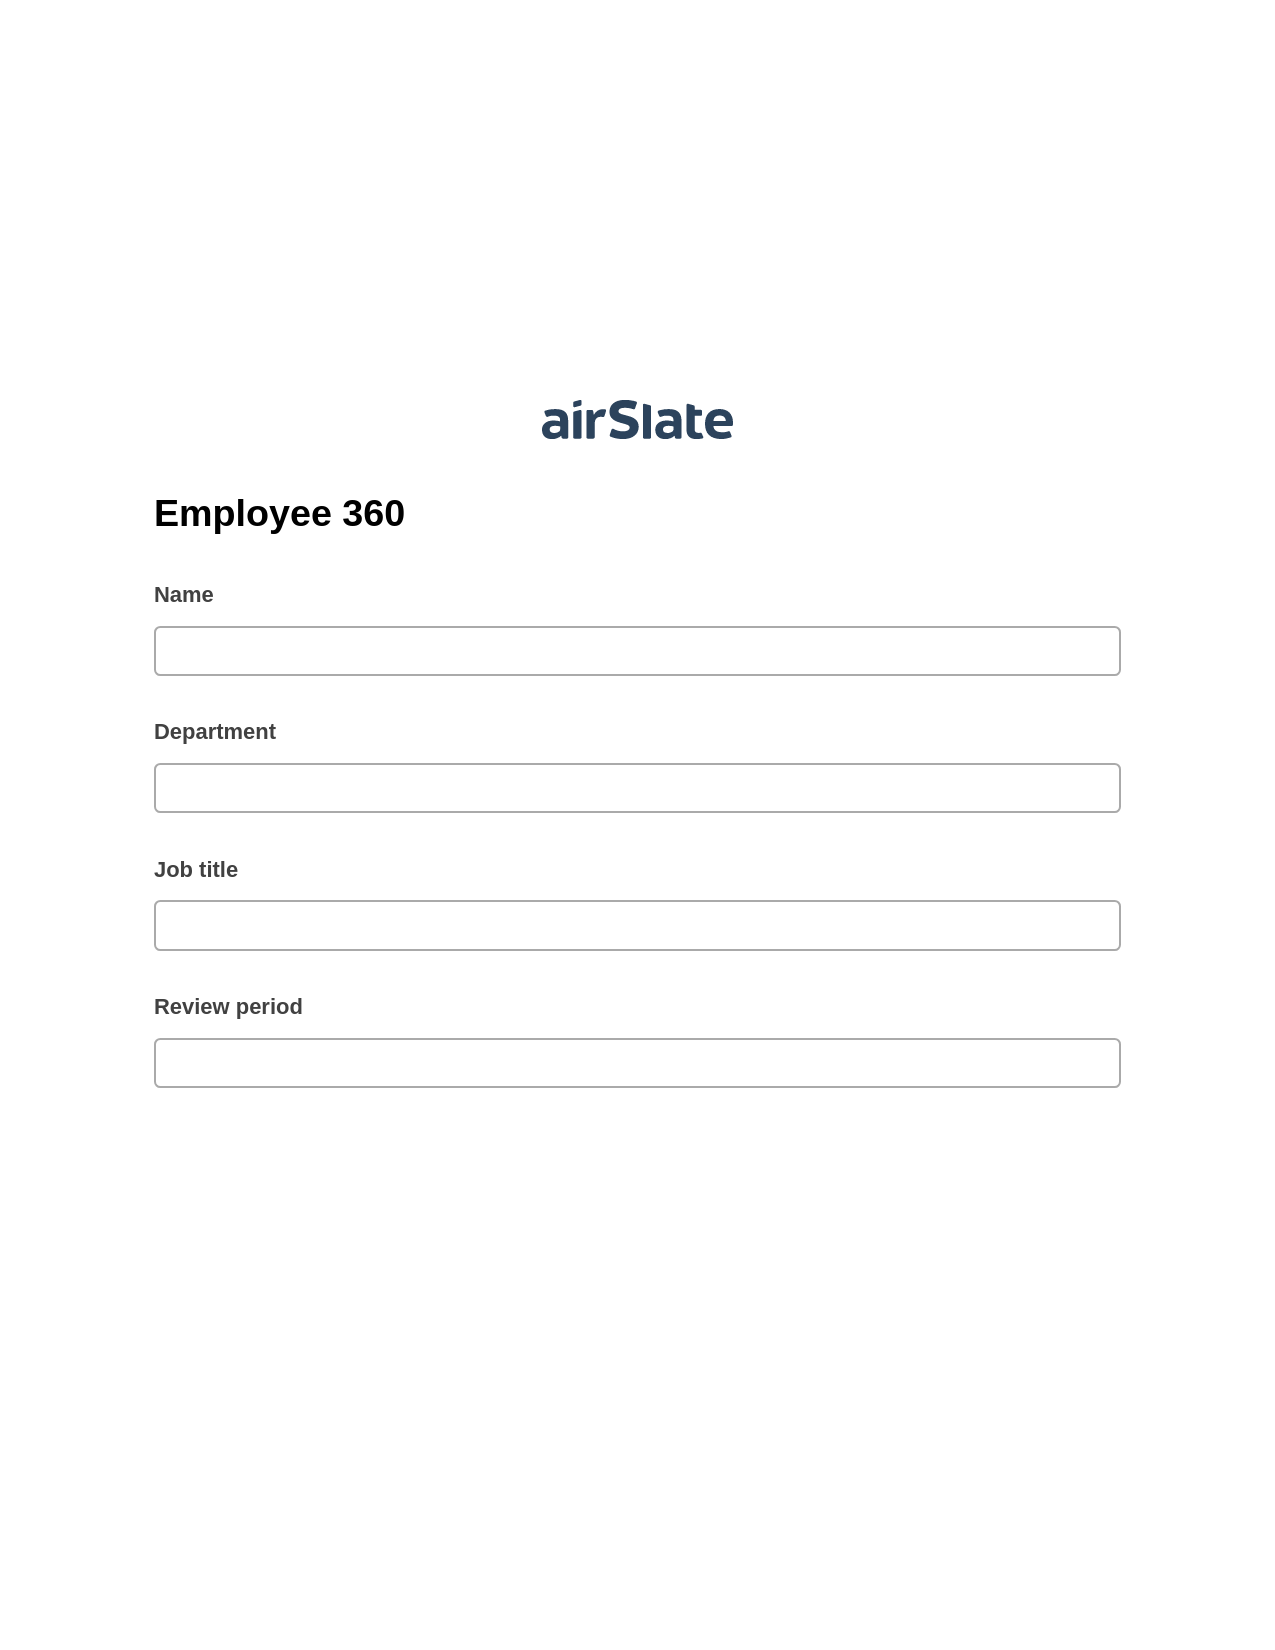 Employee 360 Pre-fill from another Slate Bot, Update MS Dynamics 365 Record Bot, Email Notification Postfinish Bot